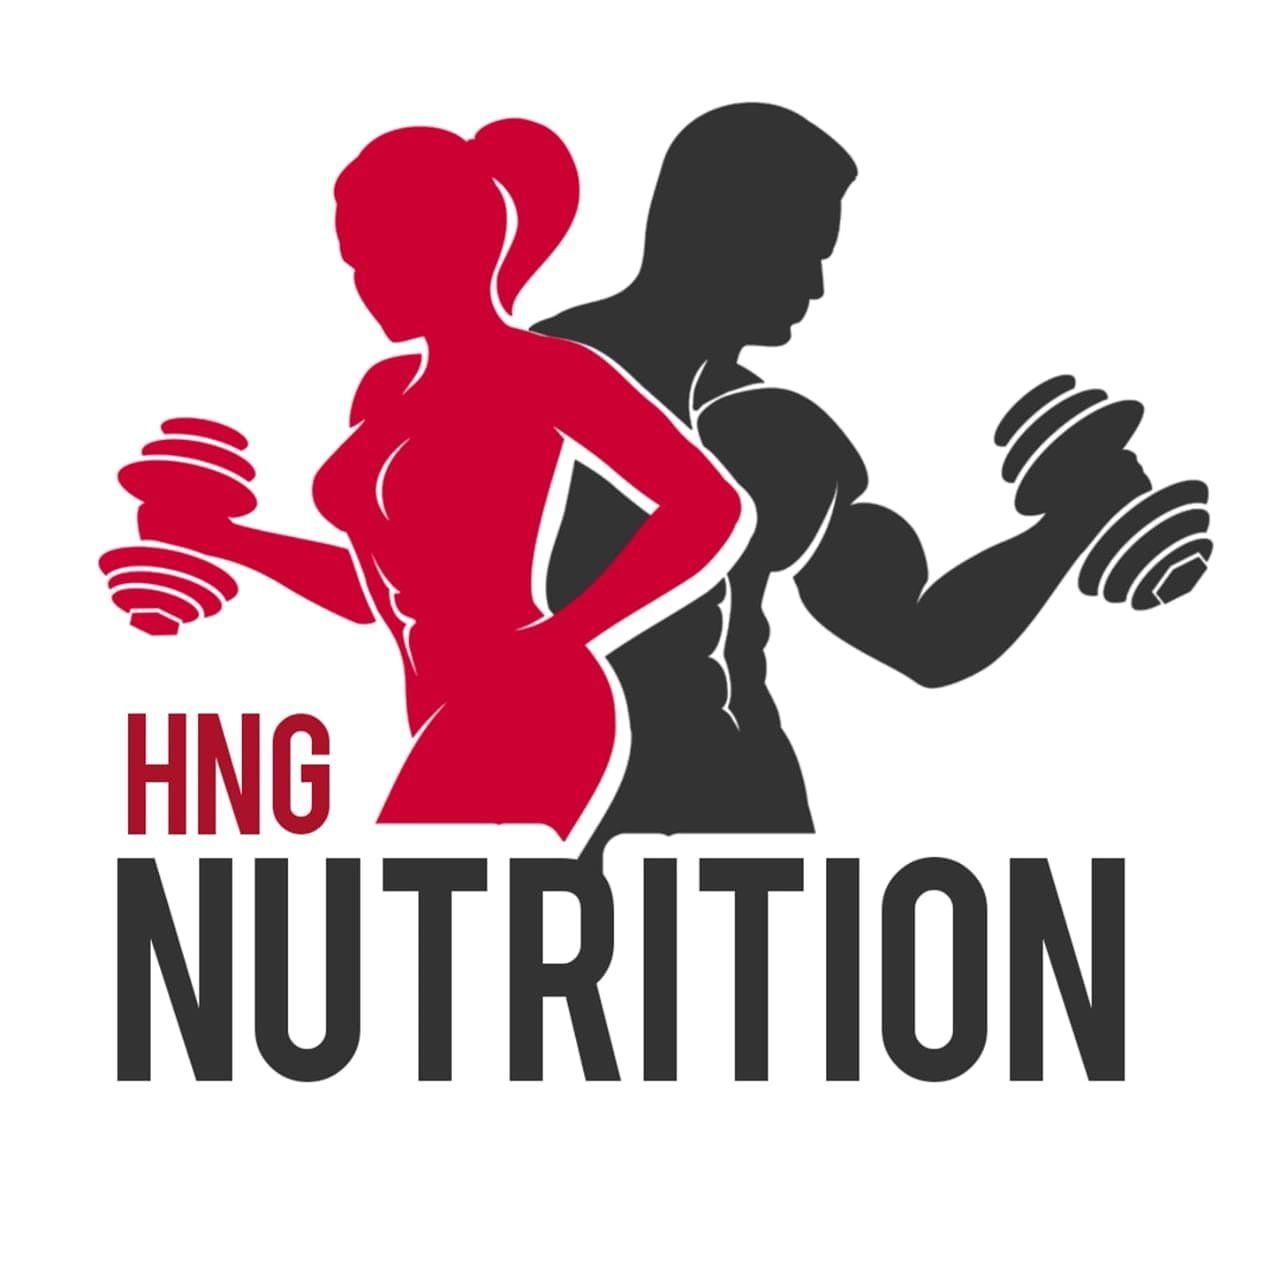 HNG NUTRITION